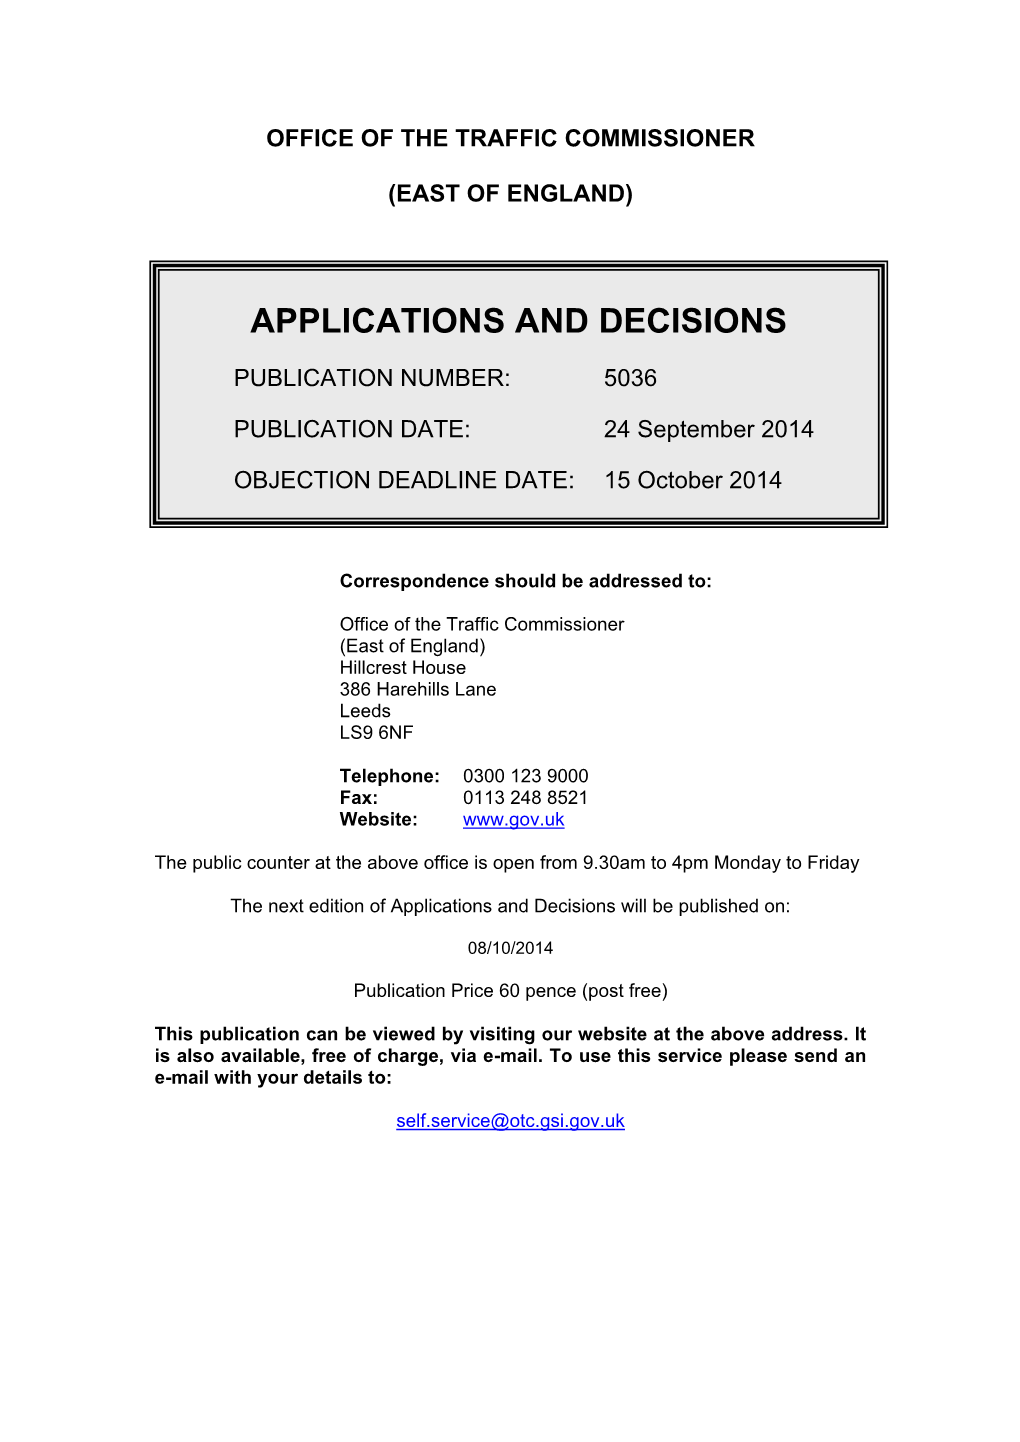 Applications and Decisions 24 September 2014